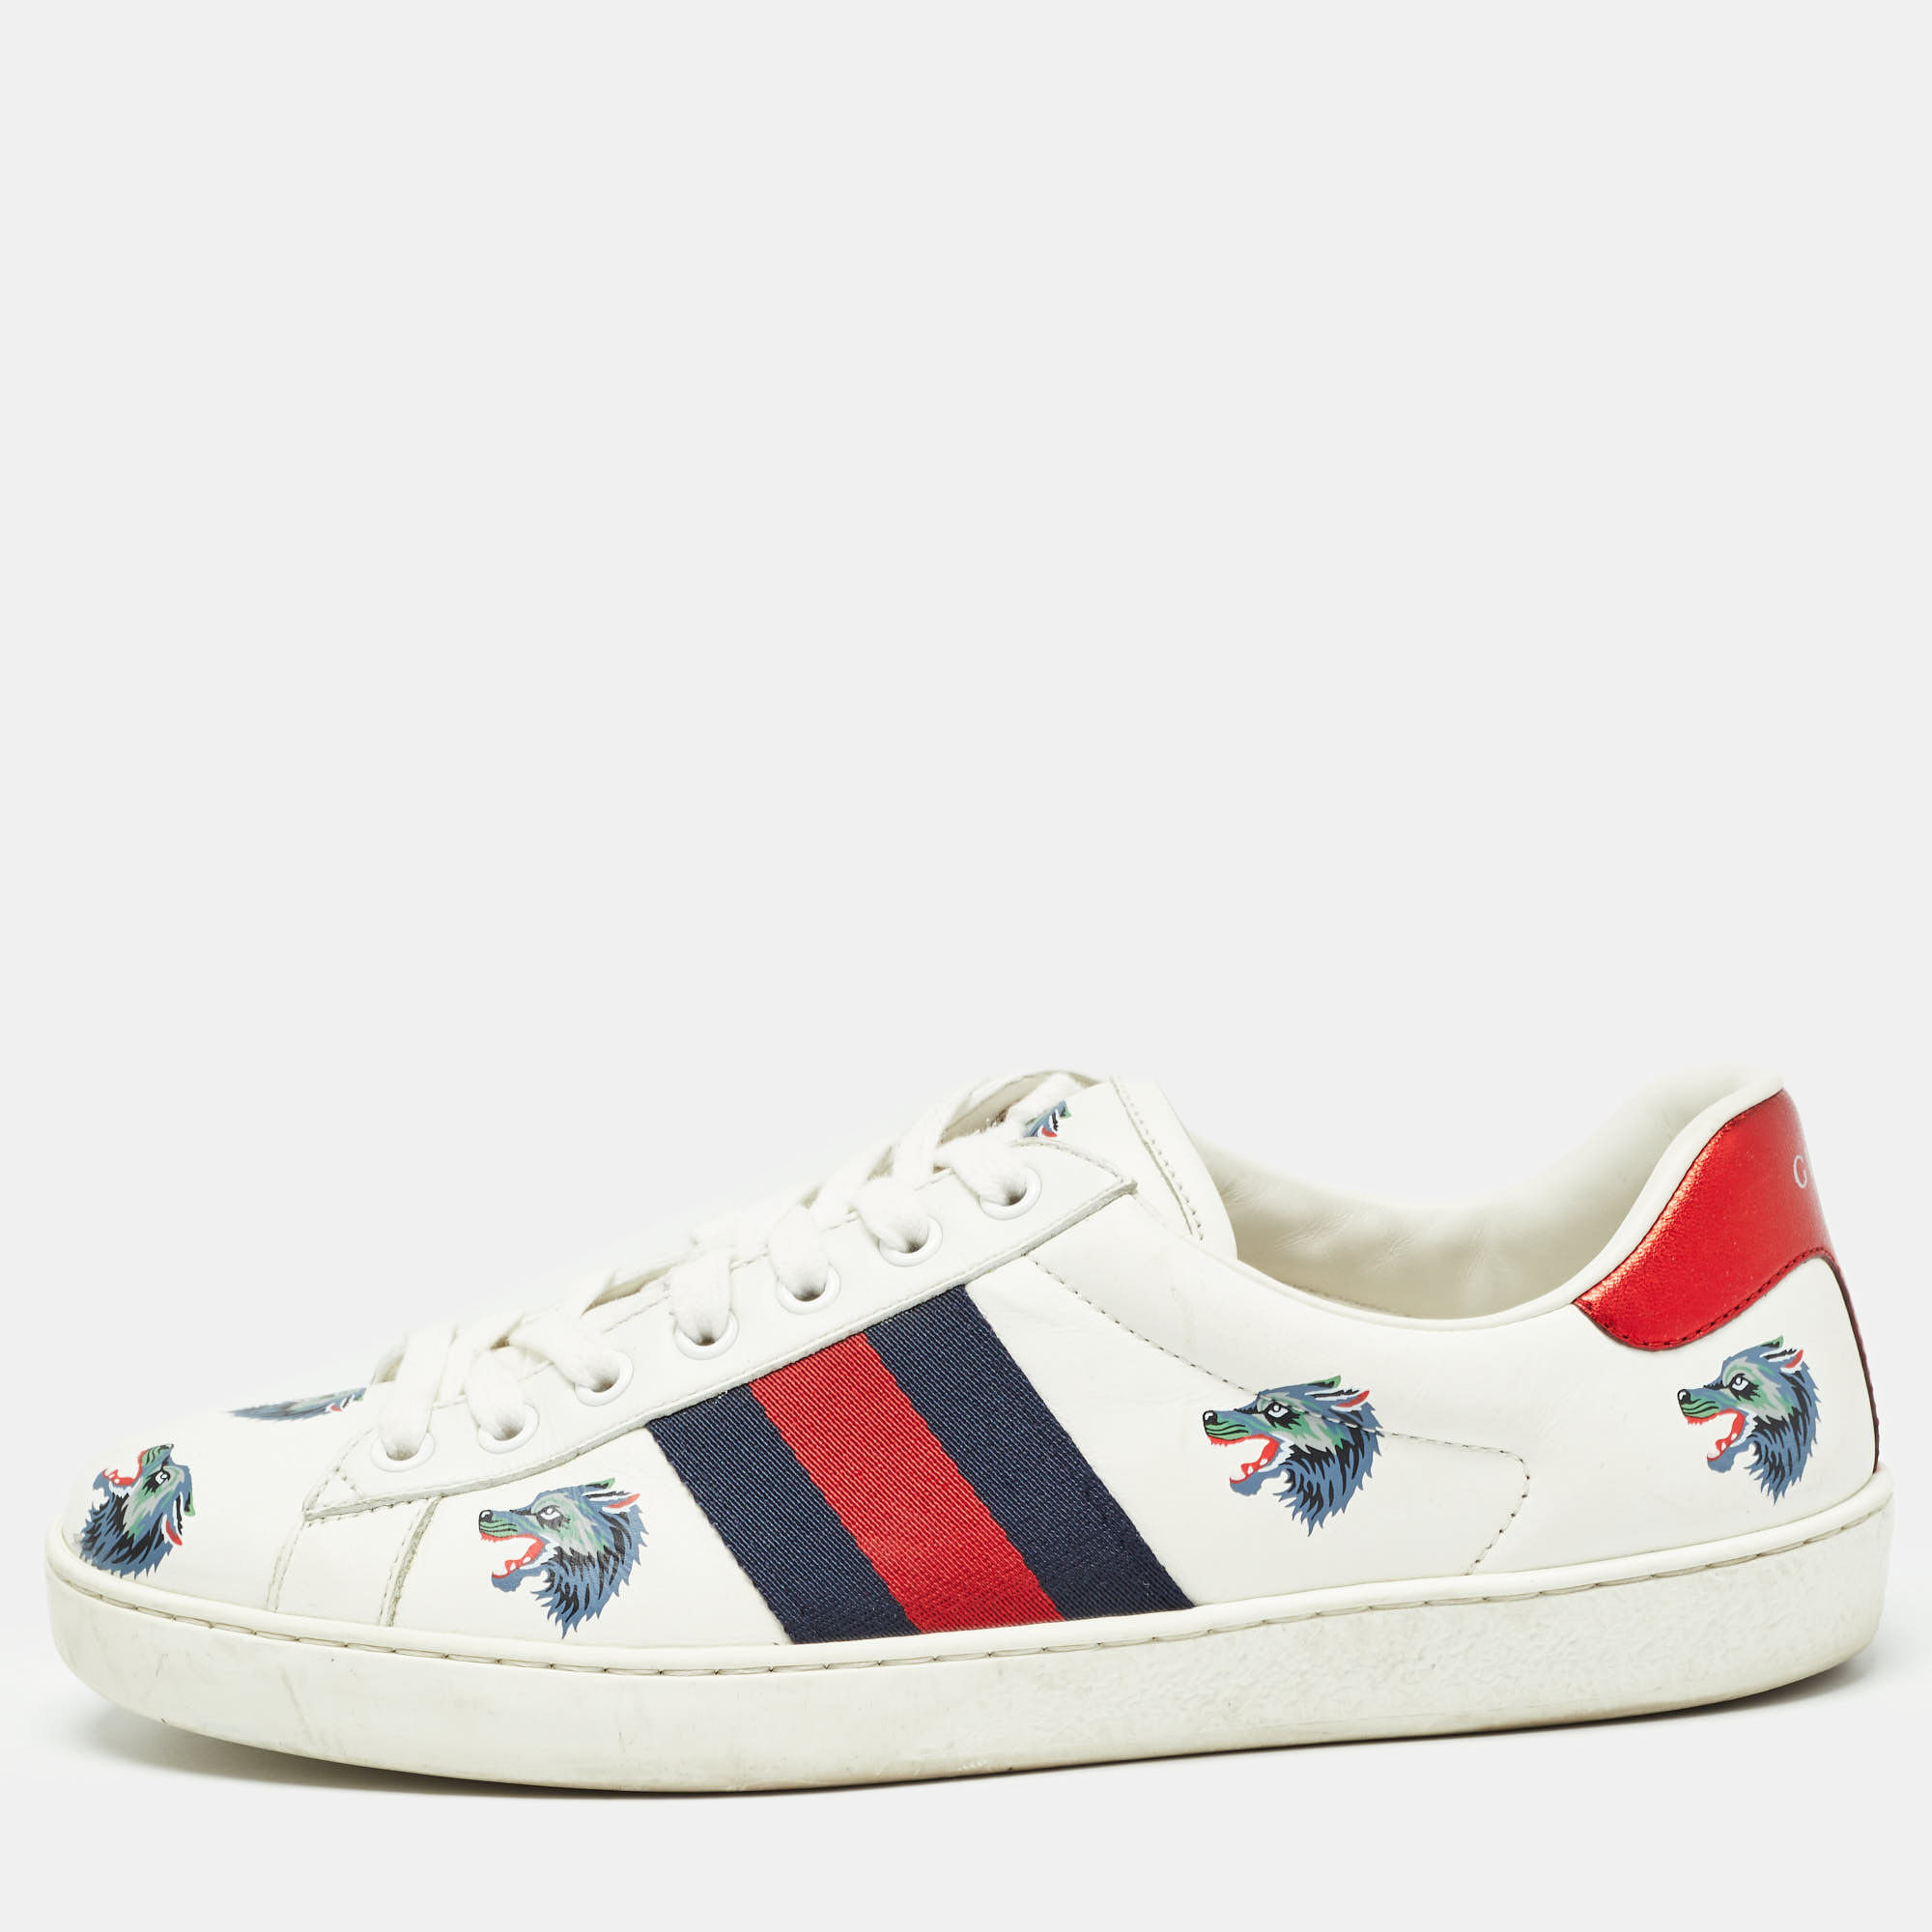 Gucci white leather wolf print ace sneakers size 41.5